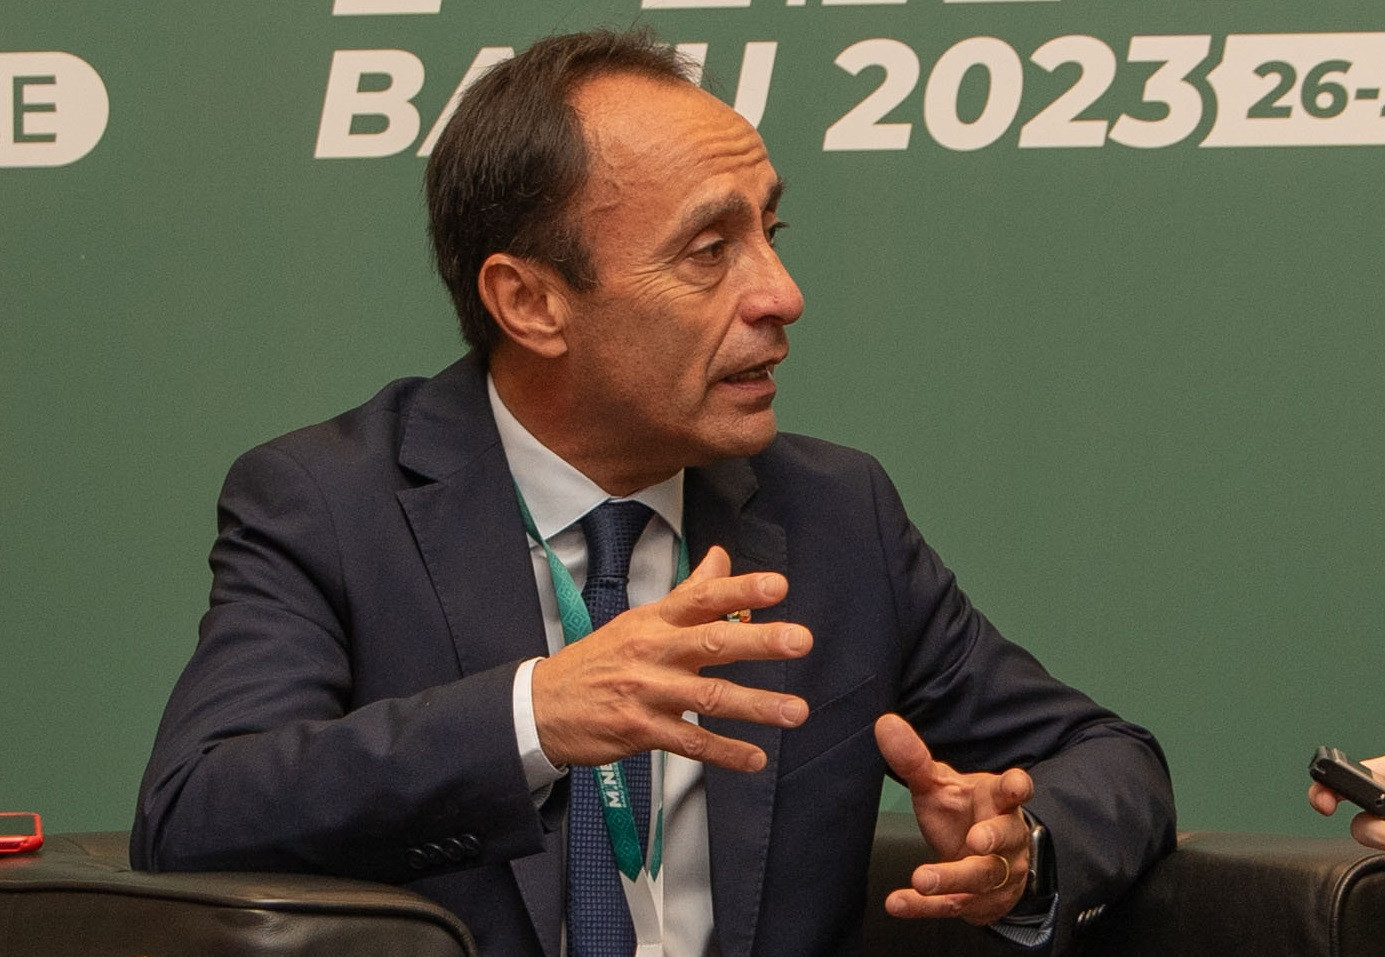 Exclusive: Sports Minister determined to make 2030 FIFA World Cup "dream" come true for Chile